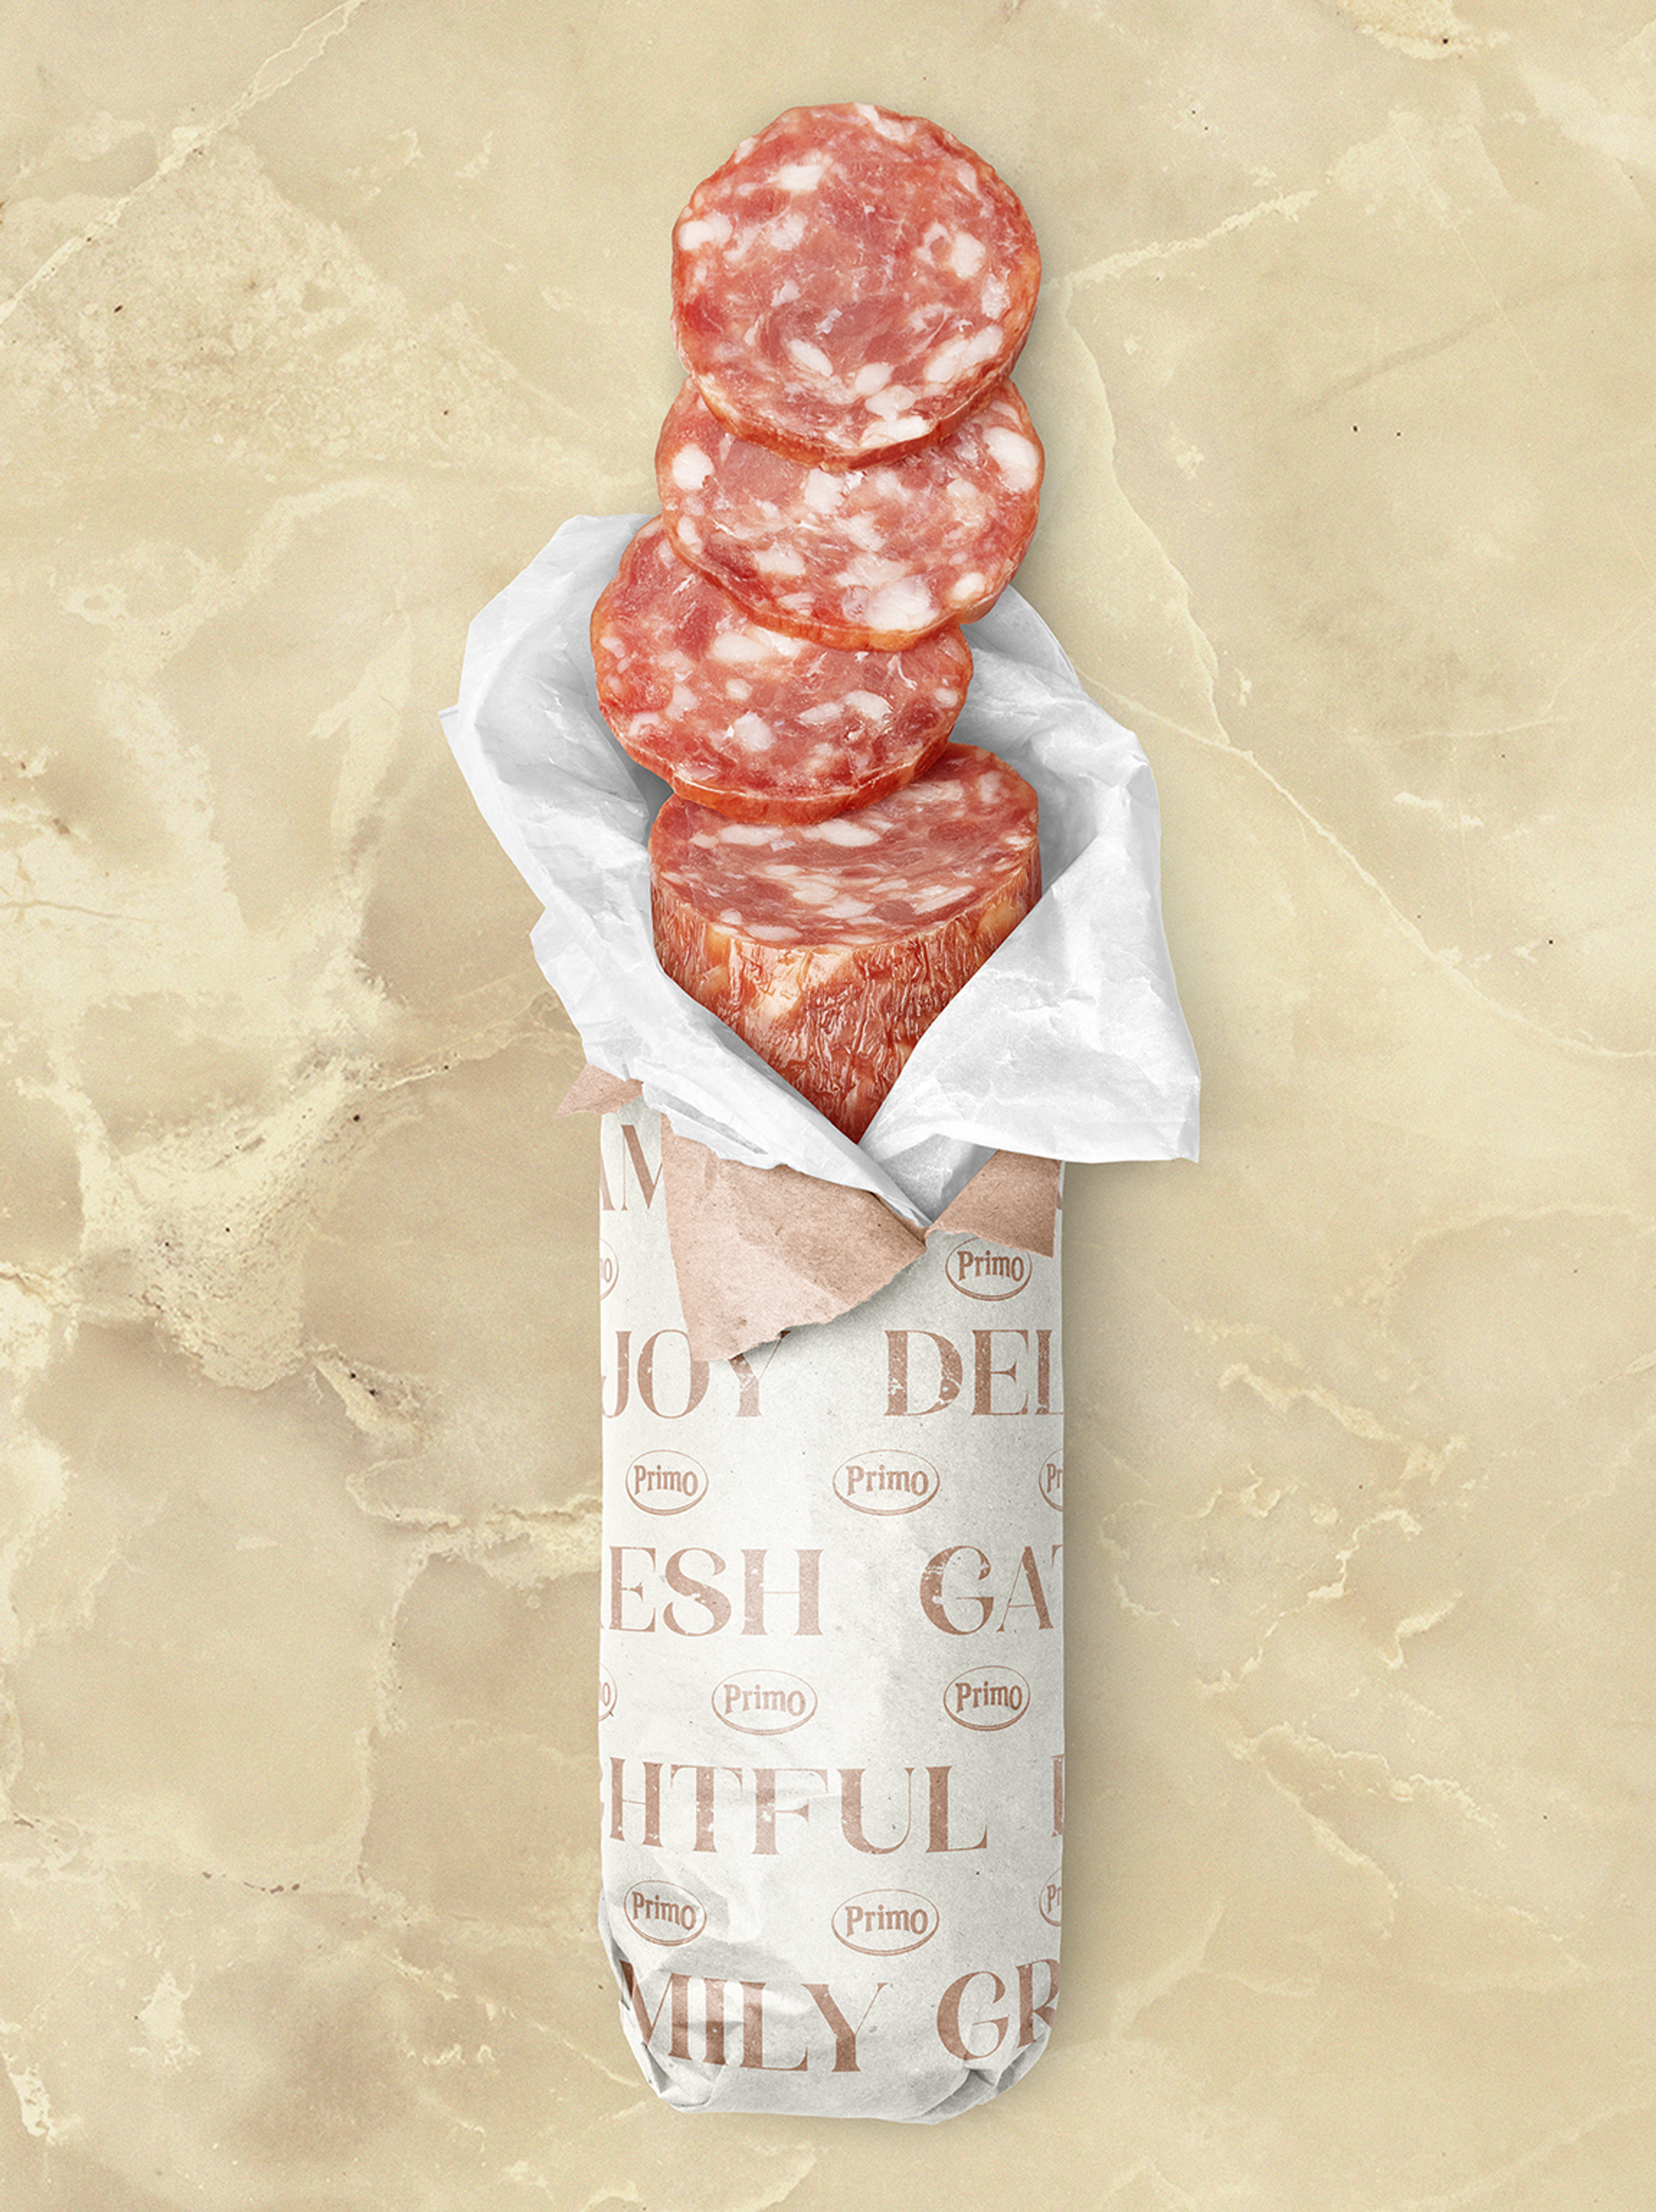 Meat brand and packaging design of an open roll of Primo’s salami, packaging design by Our Revolution